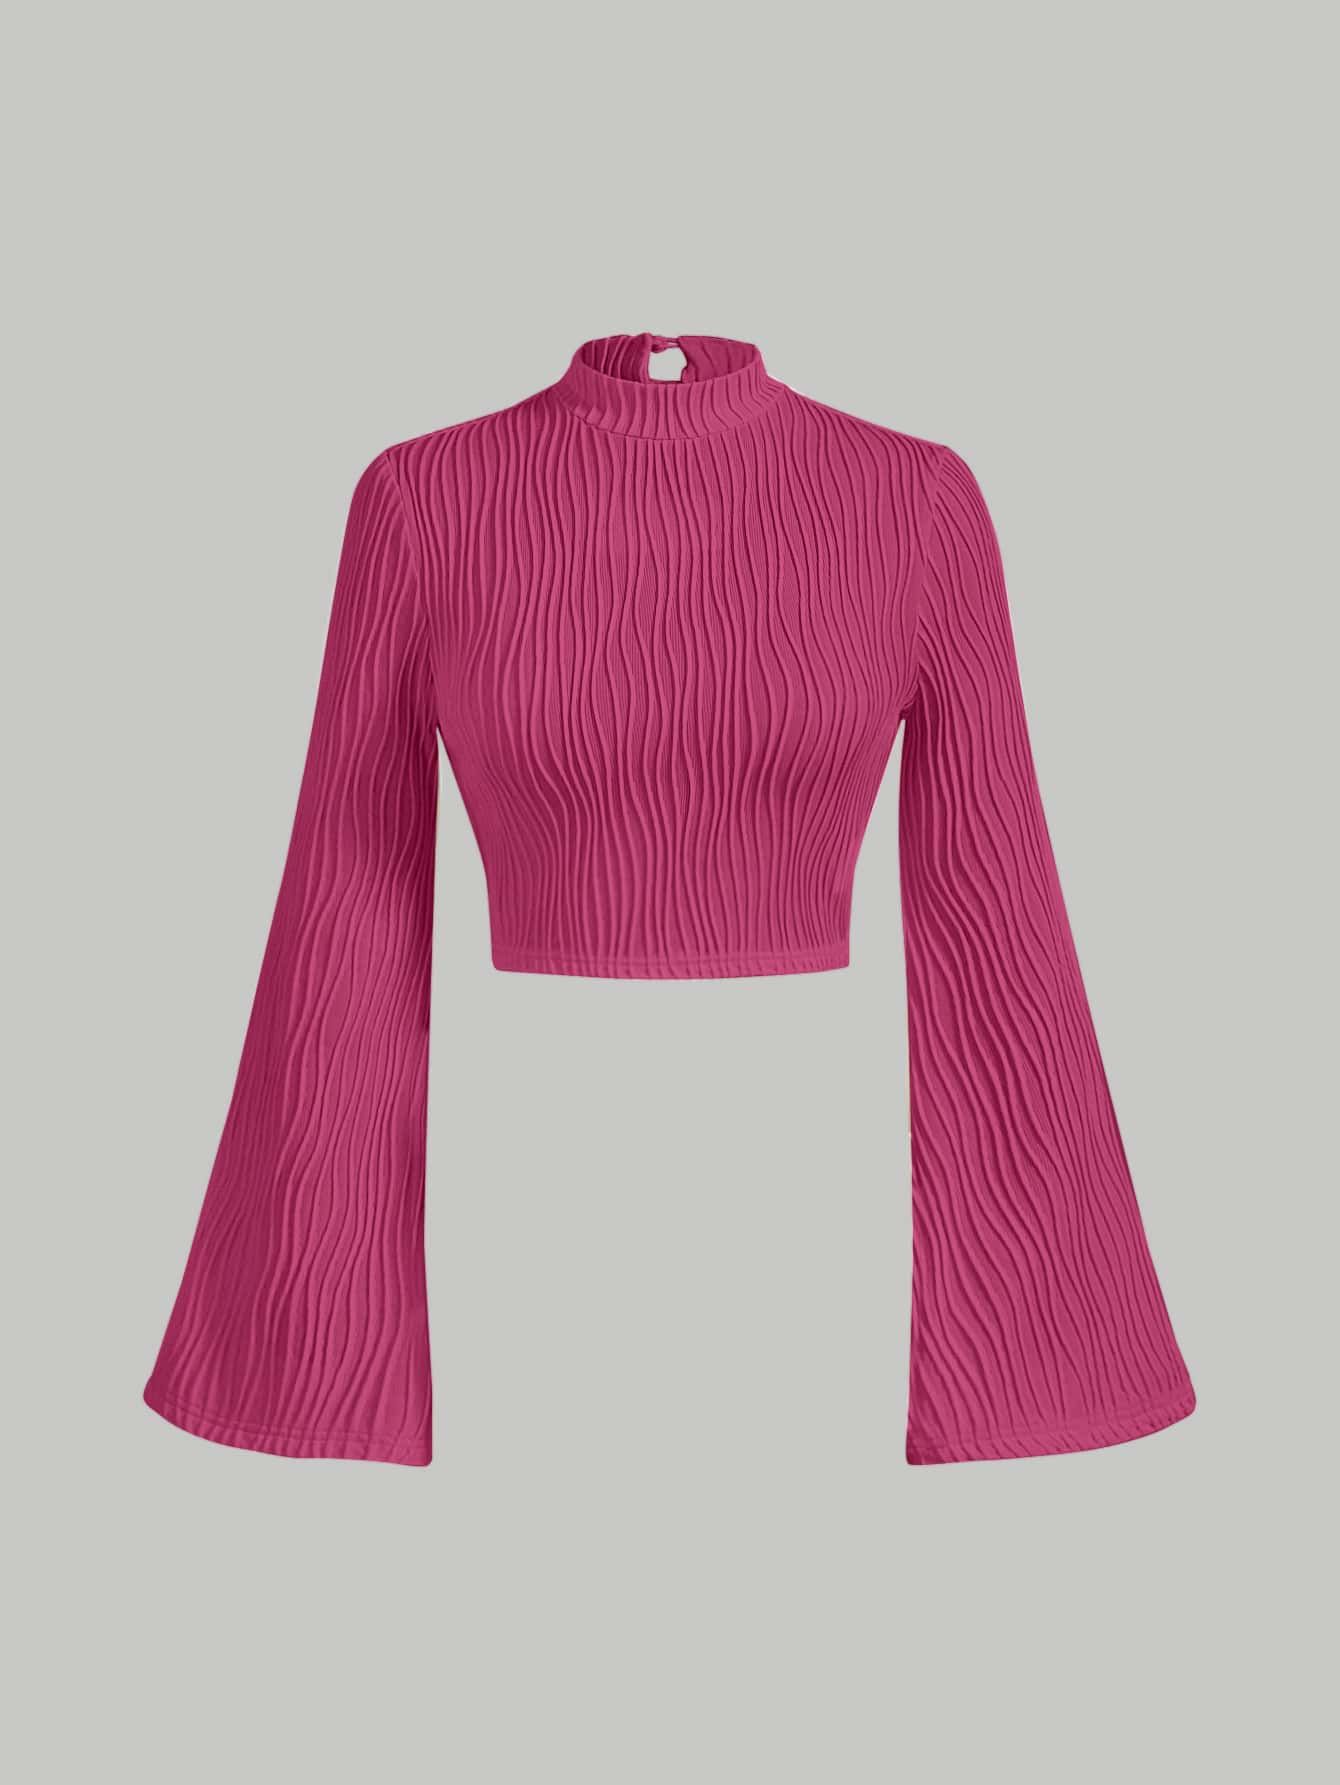 How to Style Hot Pink Blouse: 15 Stunning Outfit Ideas for Ladies